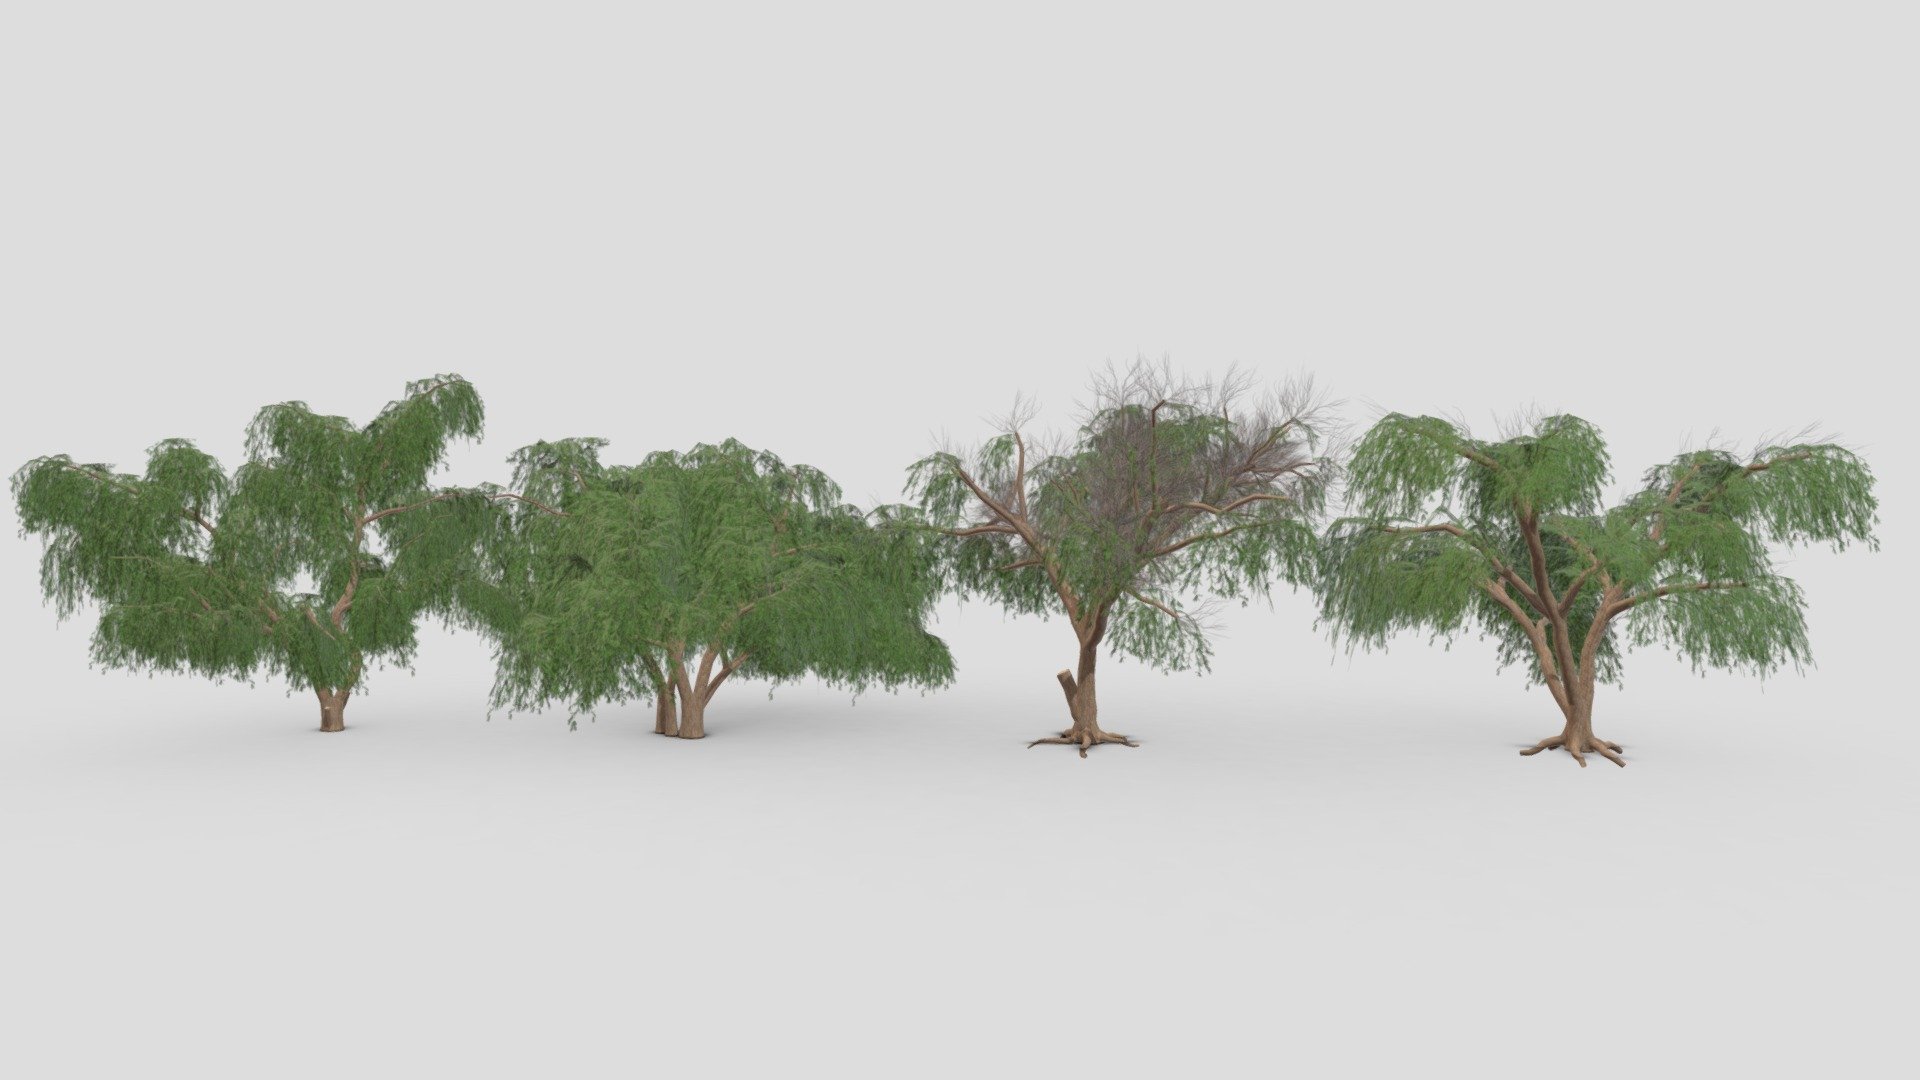 This is a low poly 3D Model collection of the Prosopis tree. This collection contains 4 3D Models of the Prosopis tree. I tried to provide you a low poly collection of the Prosopis Tree, you can use that in your projects 3d model